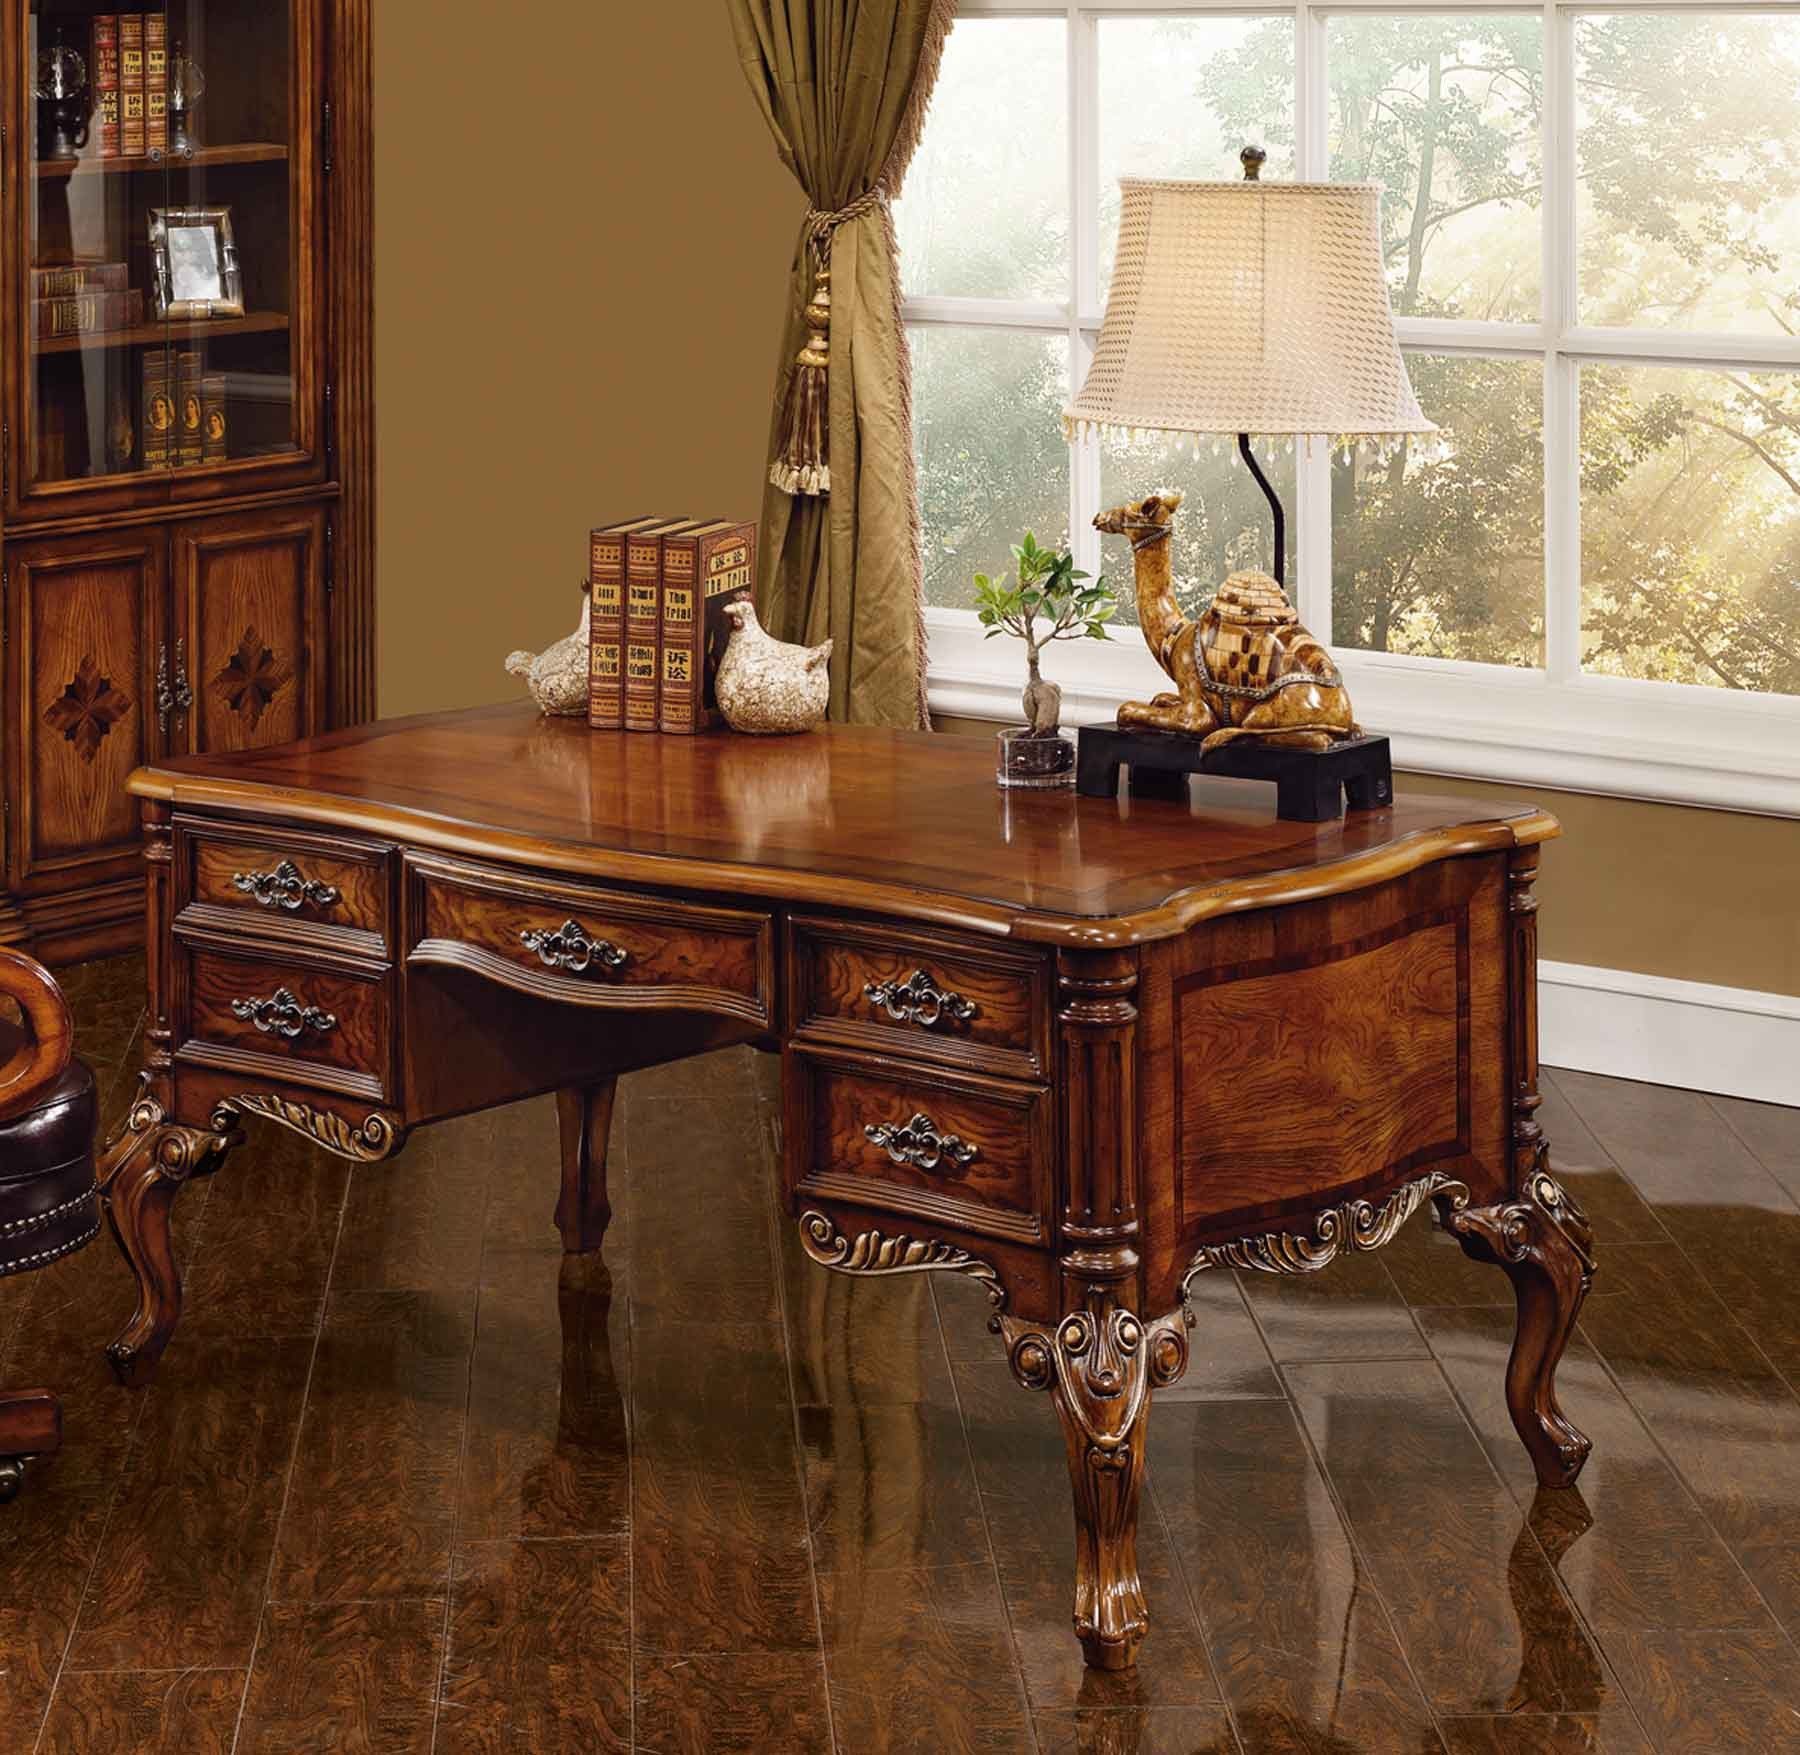 Exeter Executive Desk shown in Antique Walnut finish